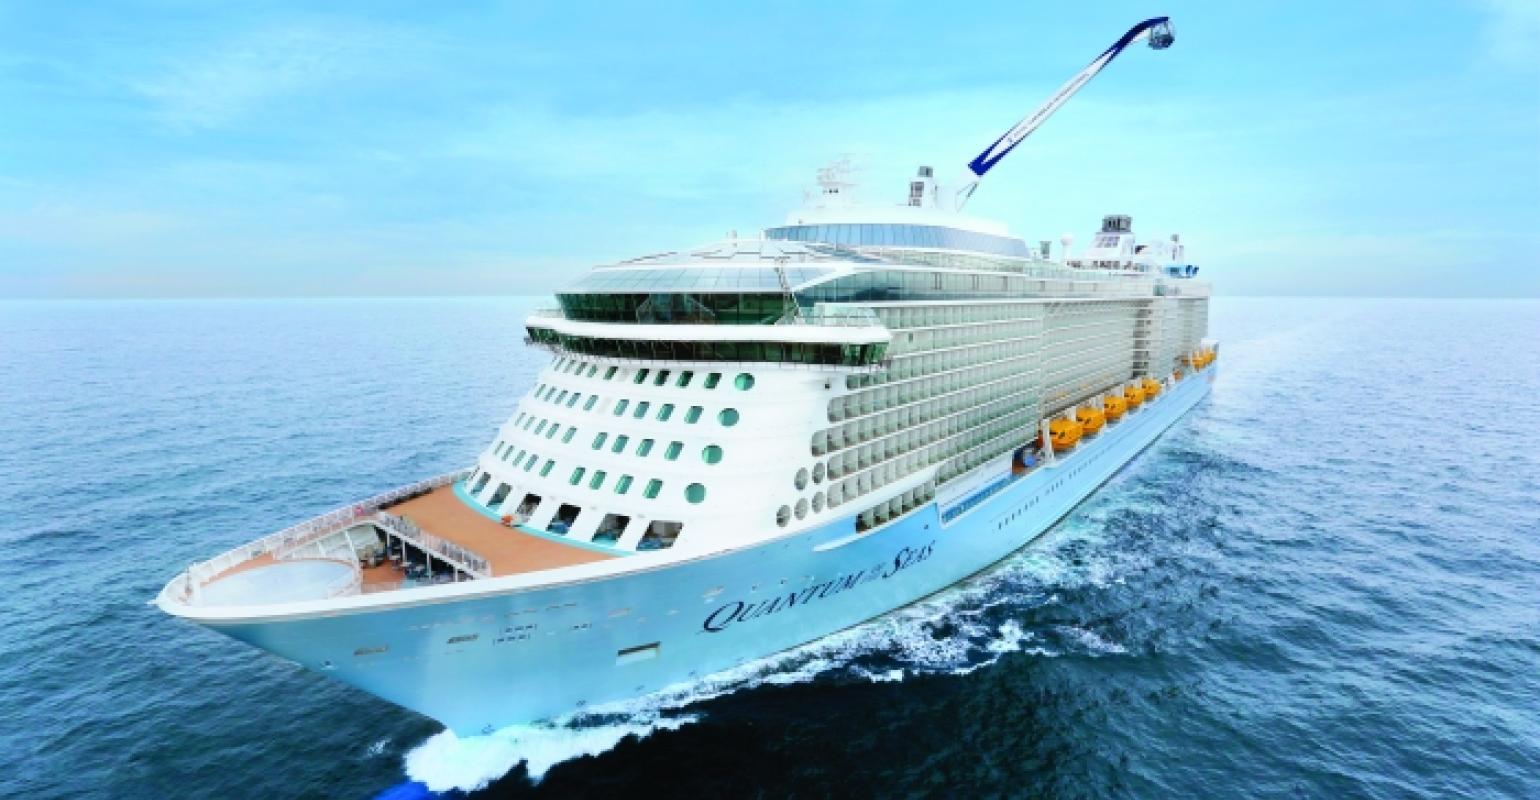 Adding Quantum, Royal Caribbean goes to four Alaska ships in 2021